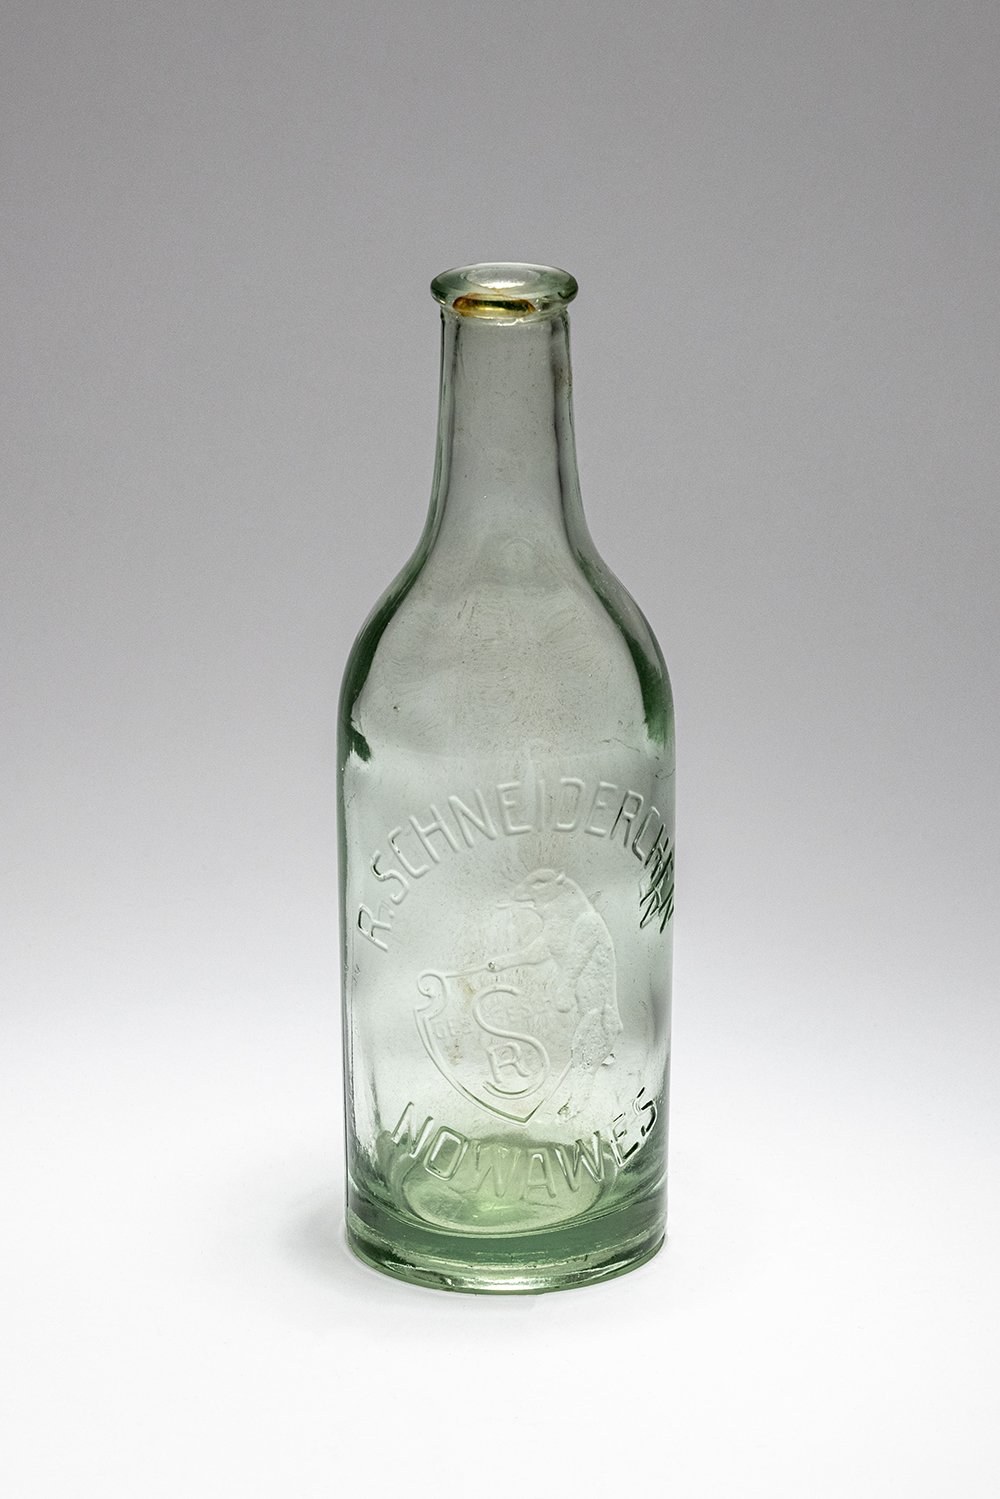 Glasflasche (Webermuseum Babelsberg CC BY-NC-SA)